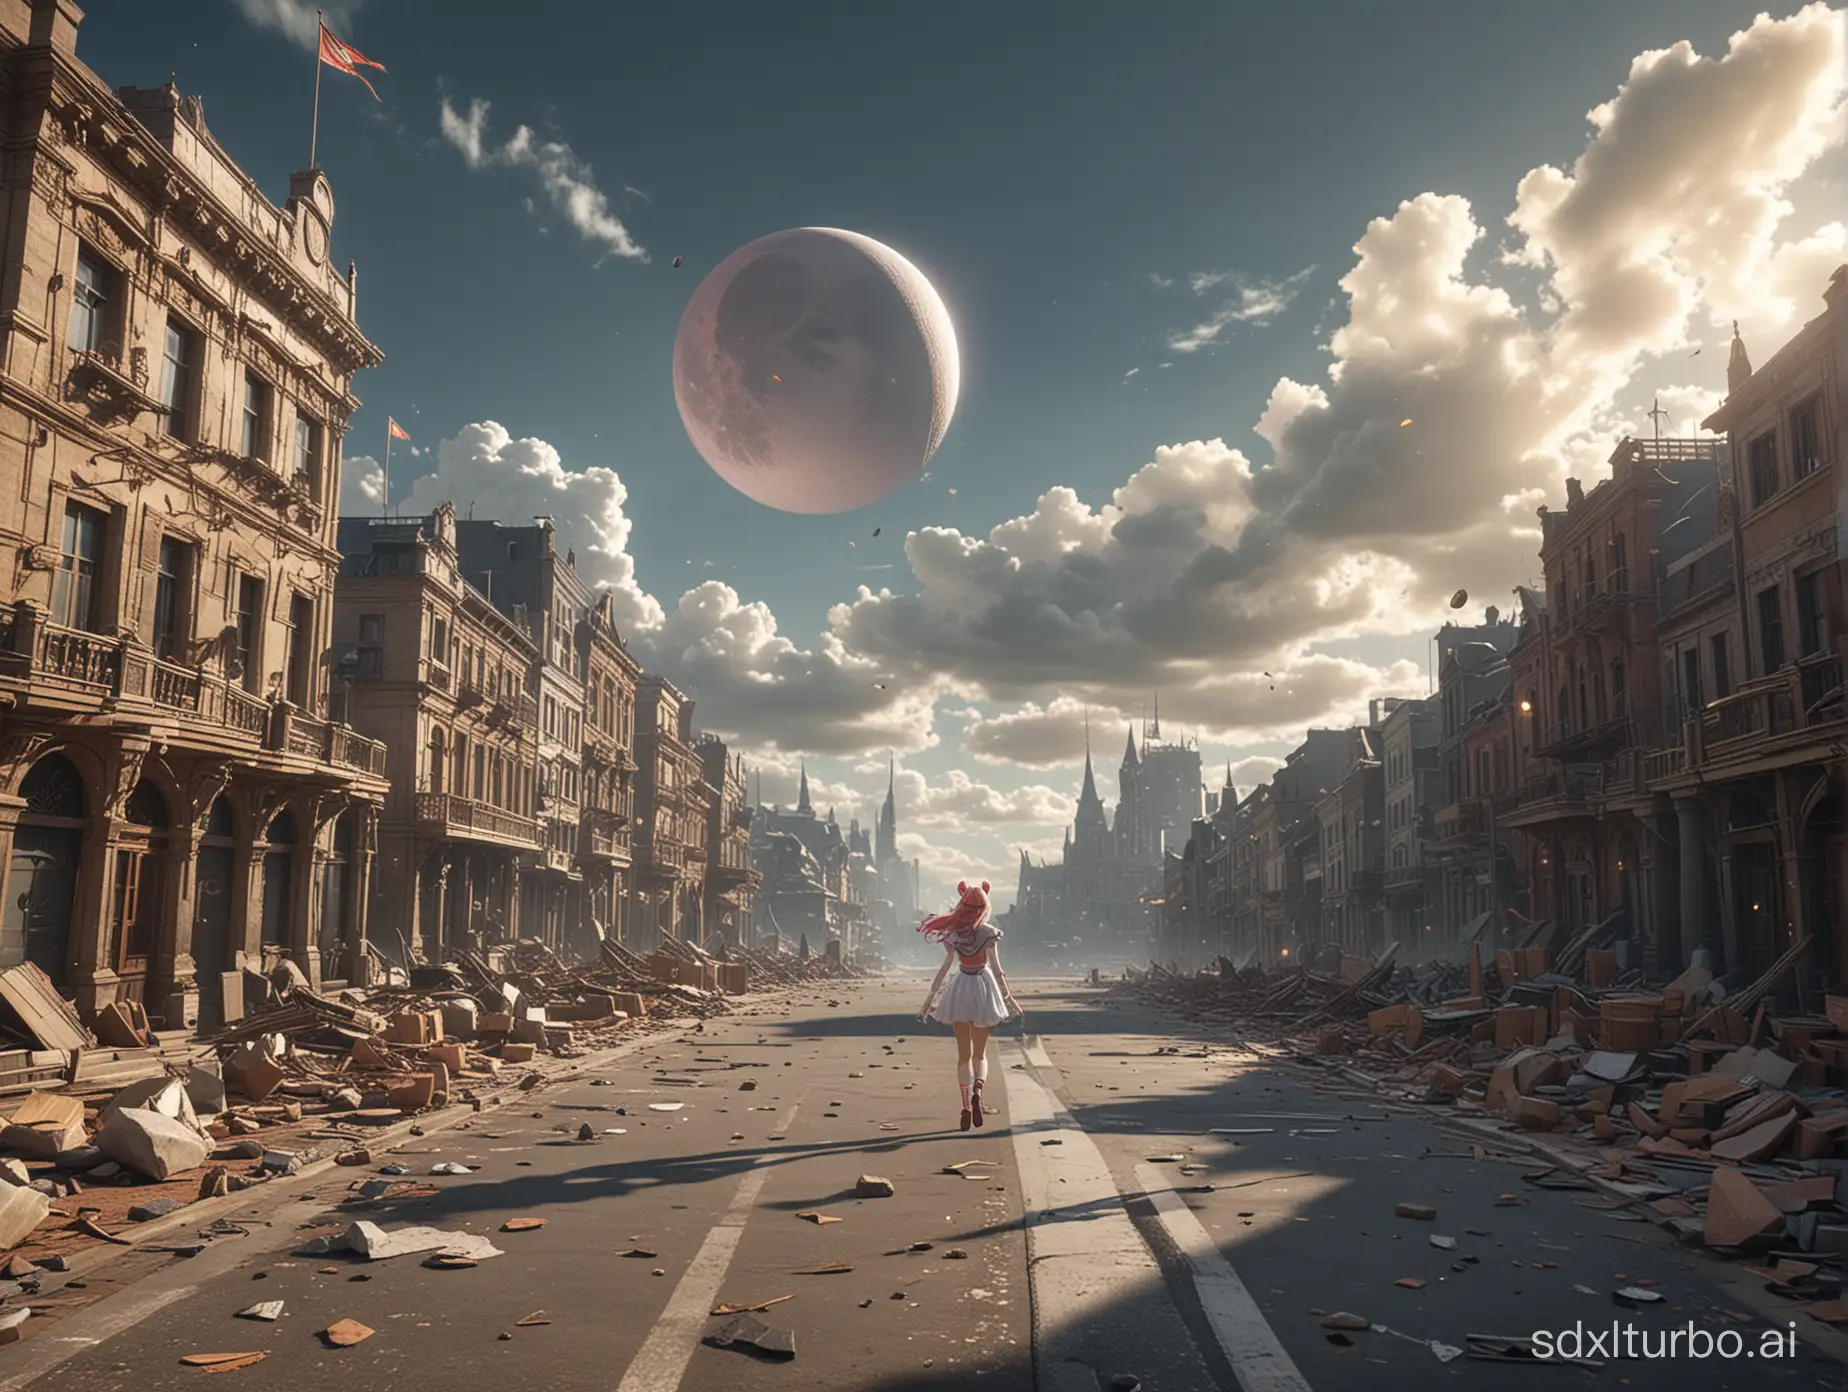 Surreal-Aerial-Rendering-Giant-Sailor-Moon-Devastates-Town-with-Natural-Light-and-HDR-Textures